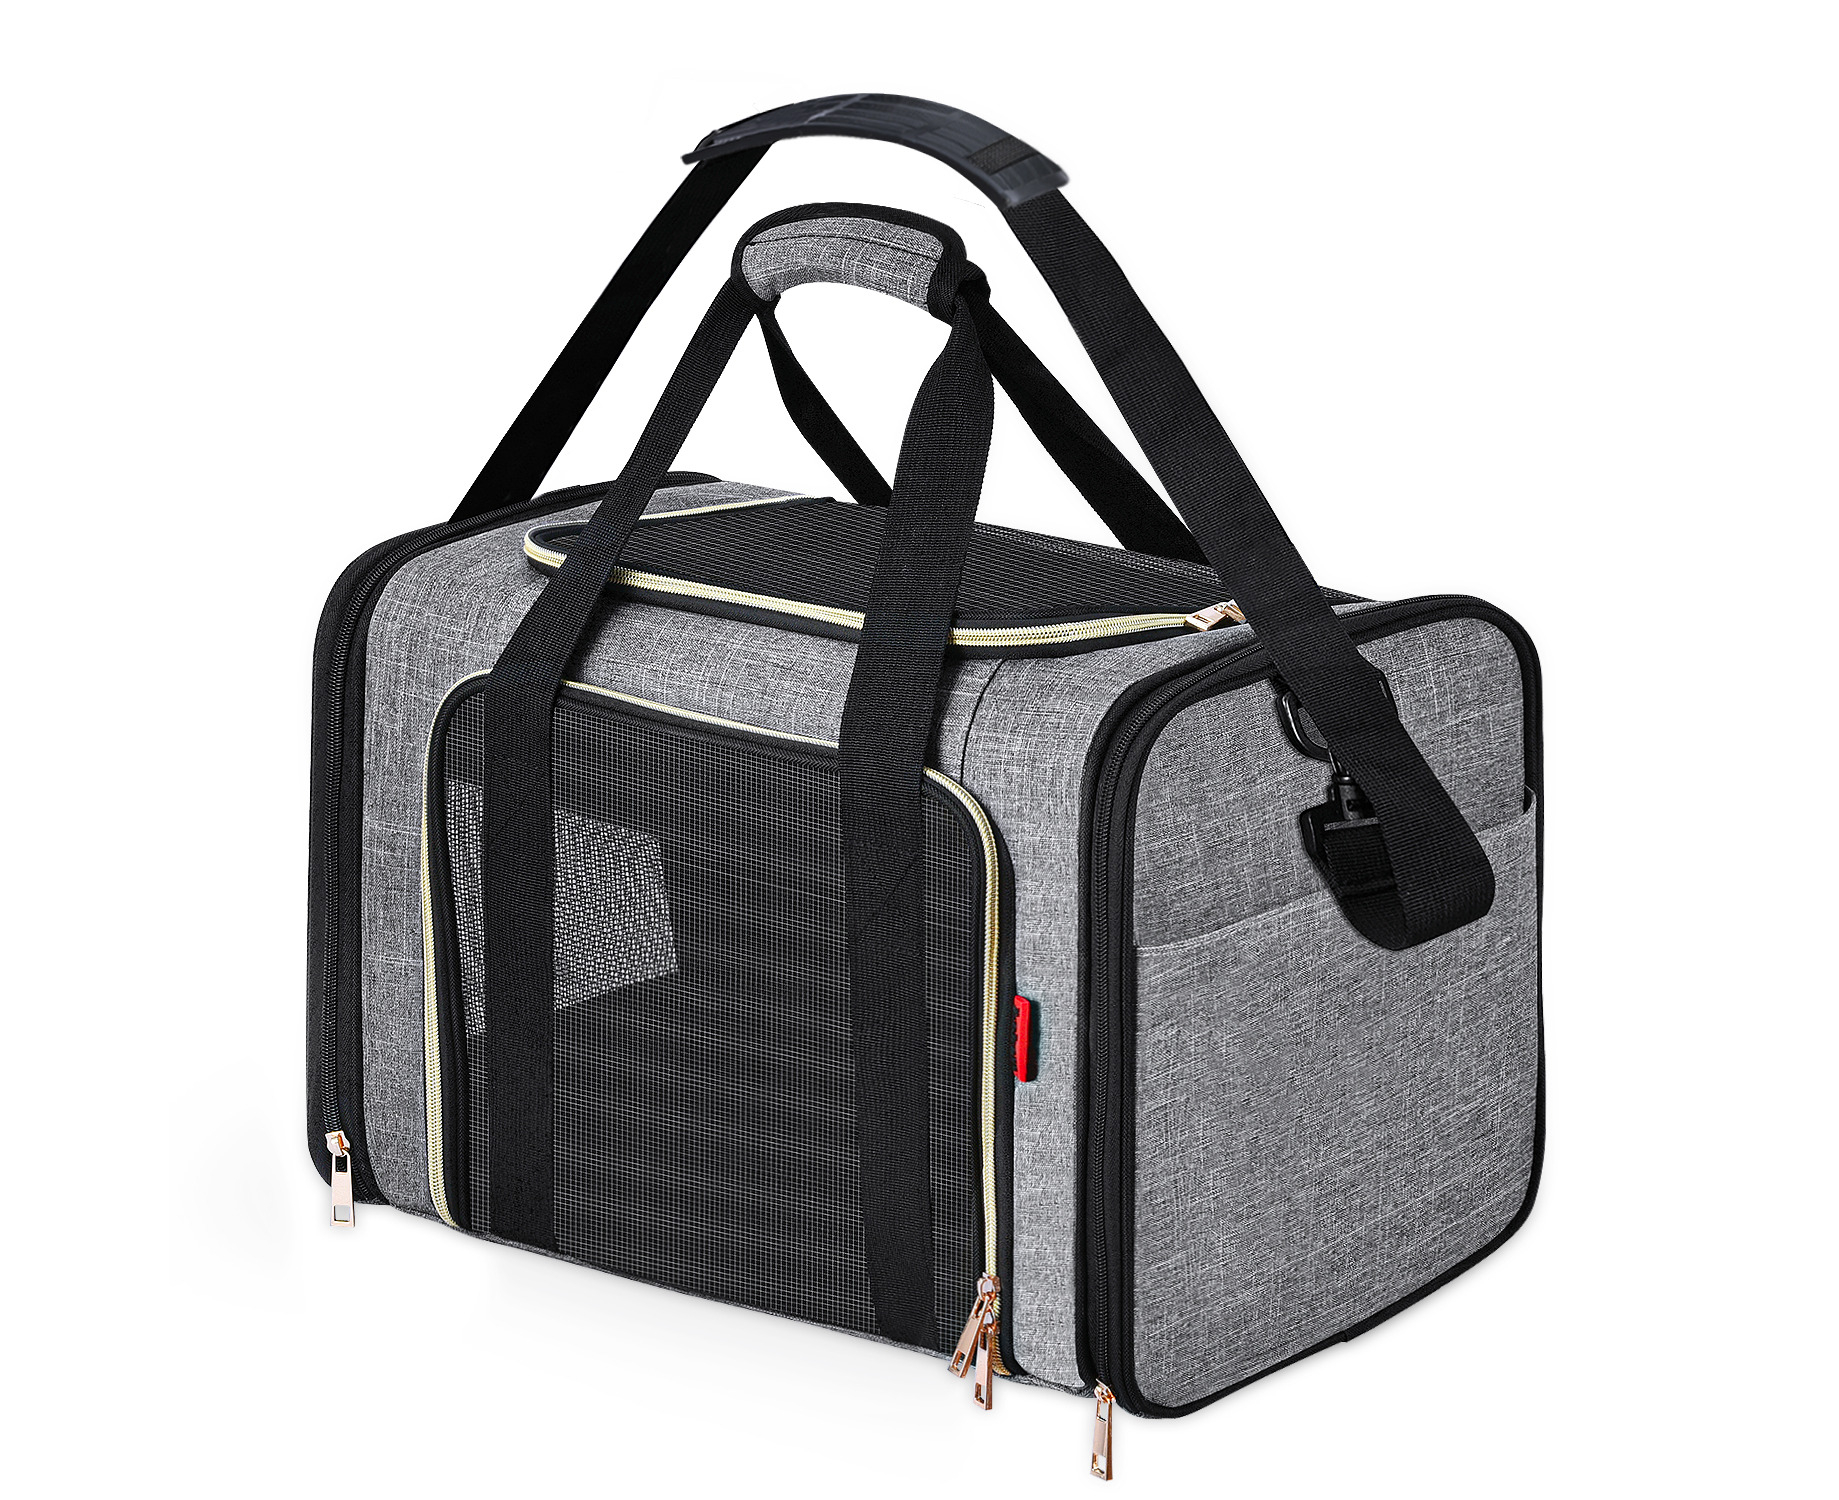 SUPPETS Dog Carrier Airline Approved Cat Carrier Pet Carrier Breathable Mesh Pet Travel Carrier for Dogs Cats with Washable Portable Mat,Detachable Shoulder Strap 